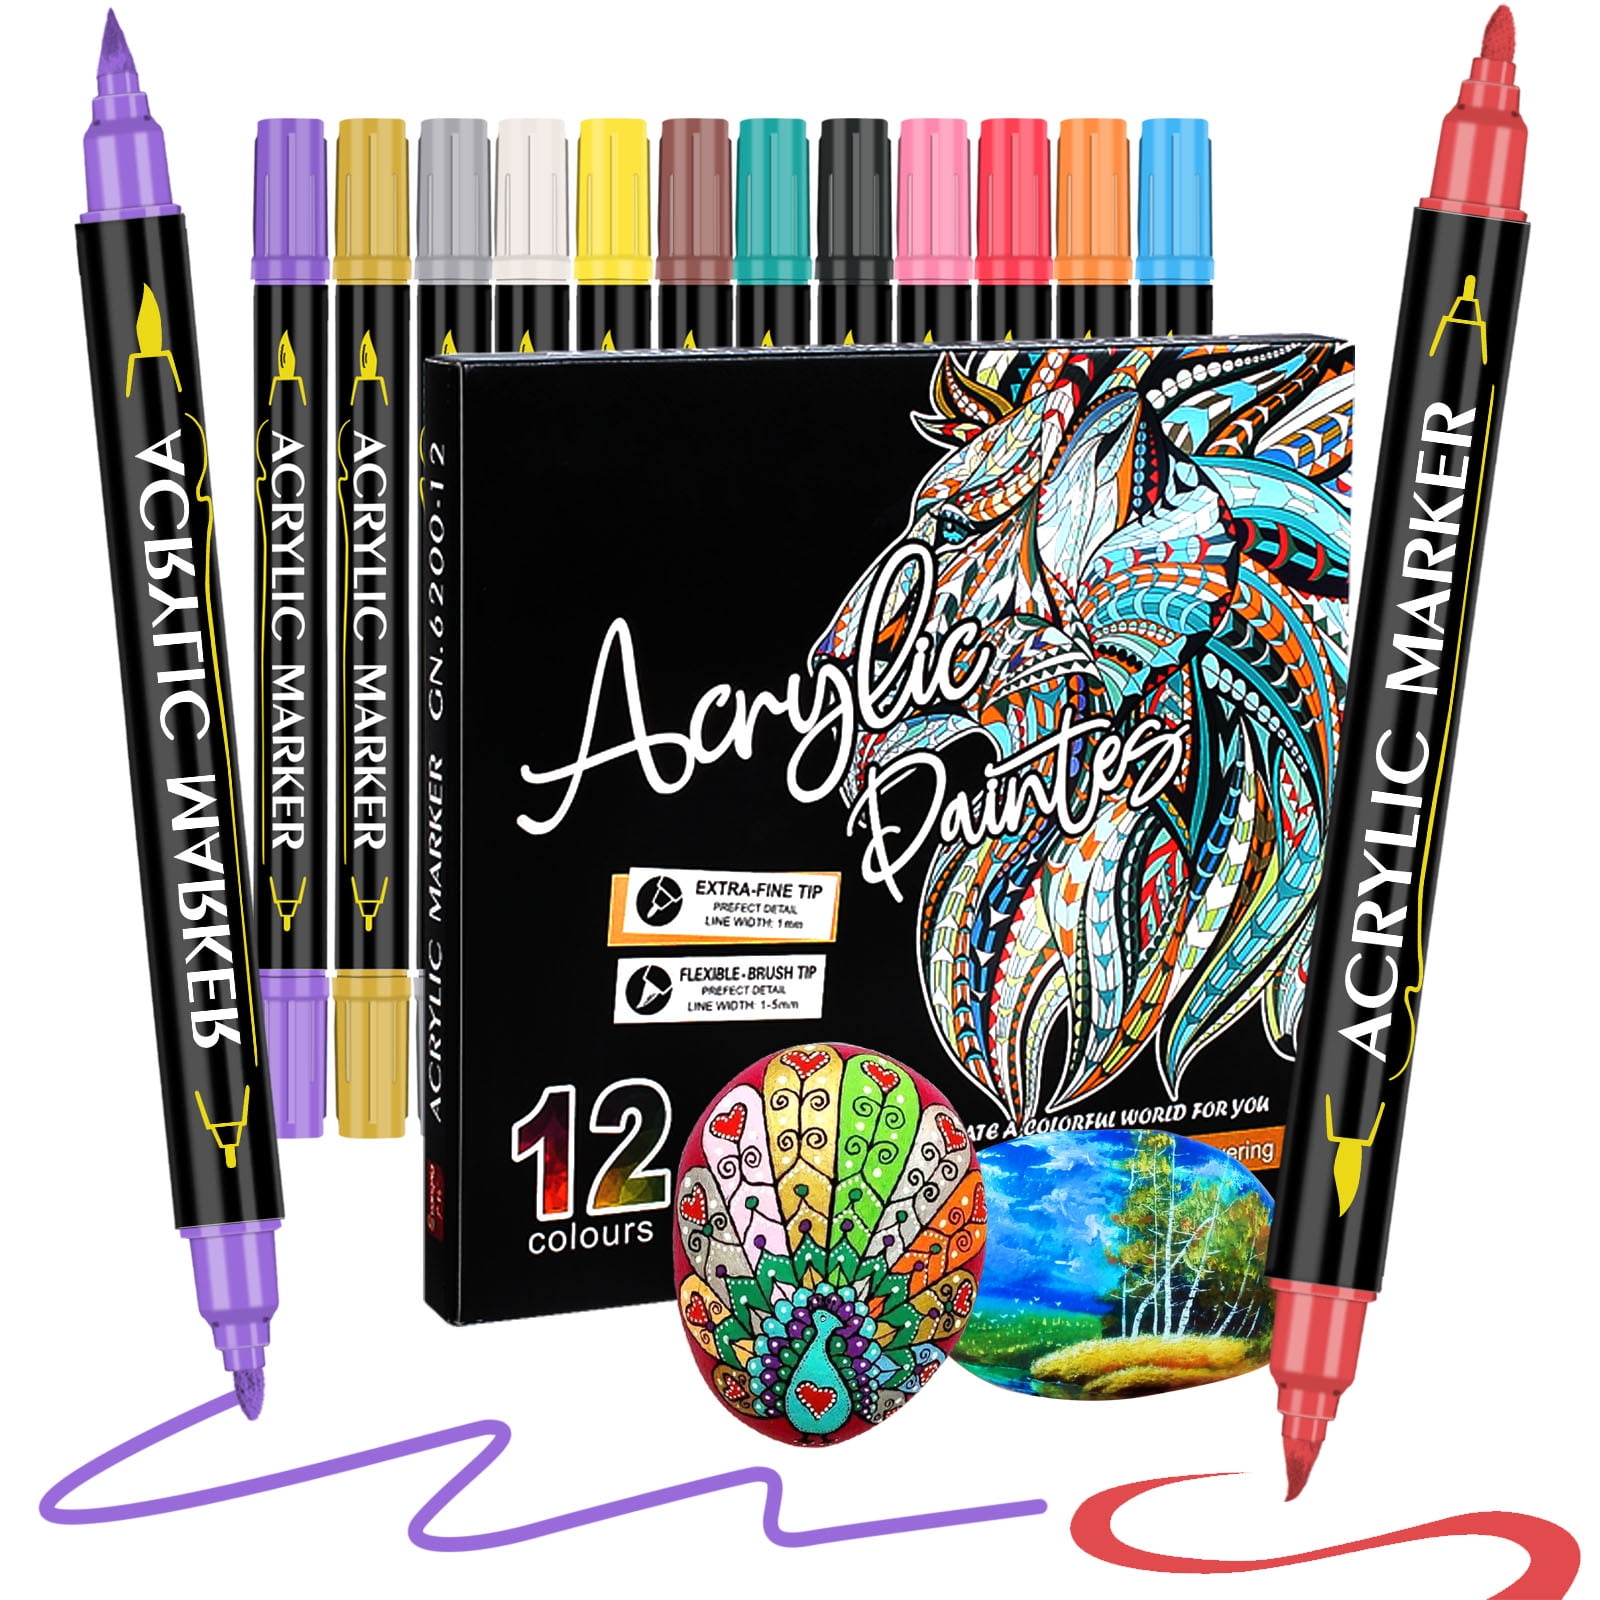  ArtBeek 36 Colors Acrylic Paint Markers, Paint Pens with Brush  Tip, Pumping Reversible Acrylic Paint Pens for Rock  Painting,Ceramic,Wood,Calligraphy,Scrapbooking,Brush Lettering,Card Making  : Arts, Crafts & Sewing